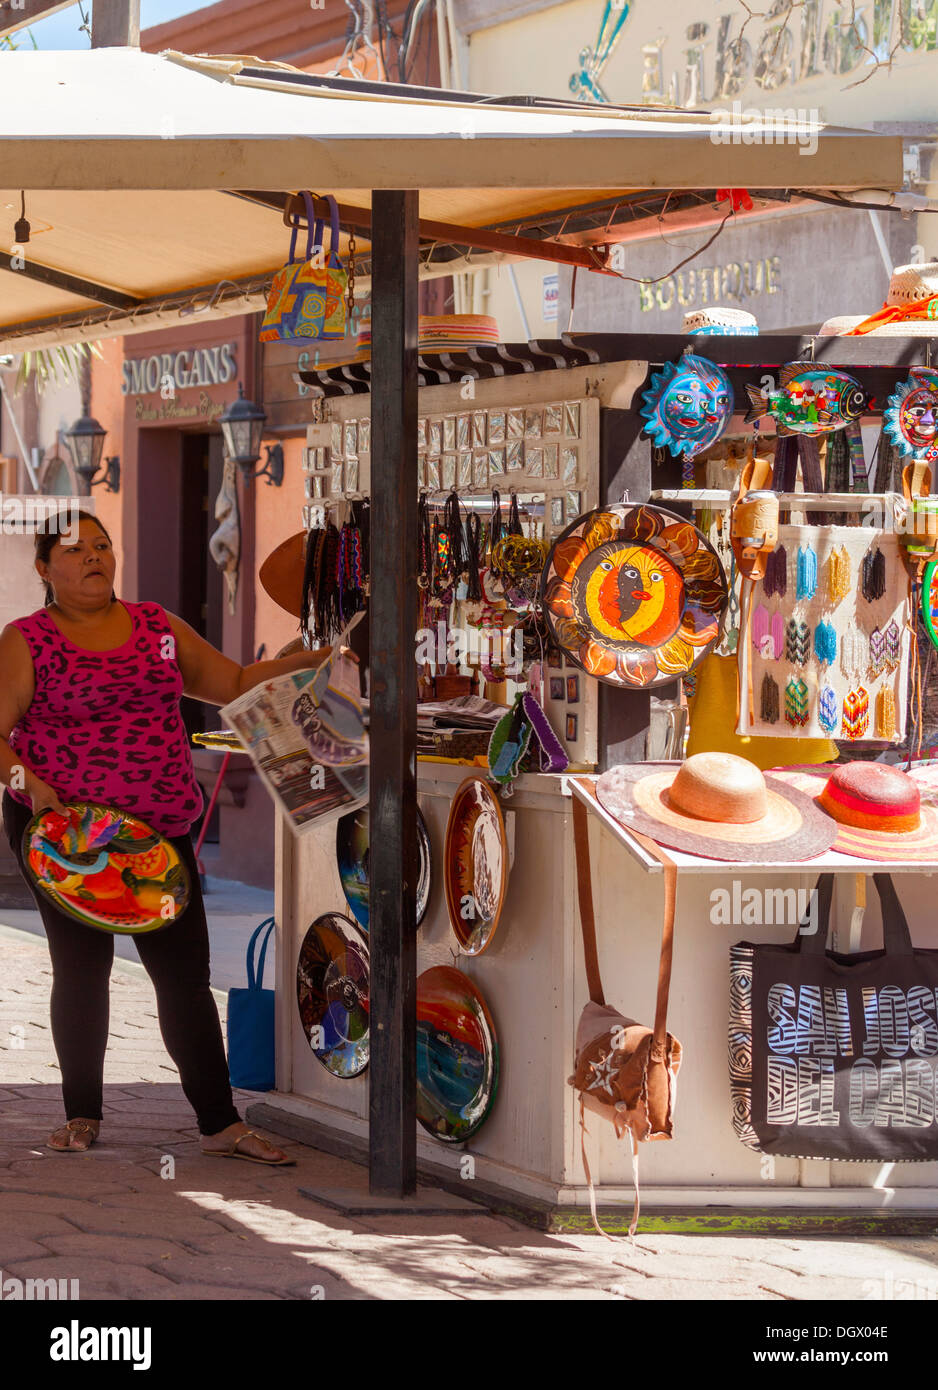 A stallholder puts the finishing touches to her souvenir stall in central Cabo San Lucas, Baja California Sur, Mexico Stock Photo